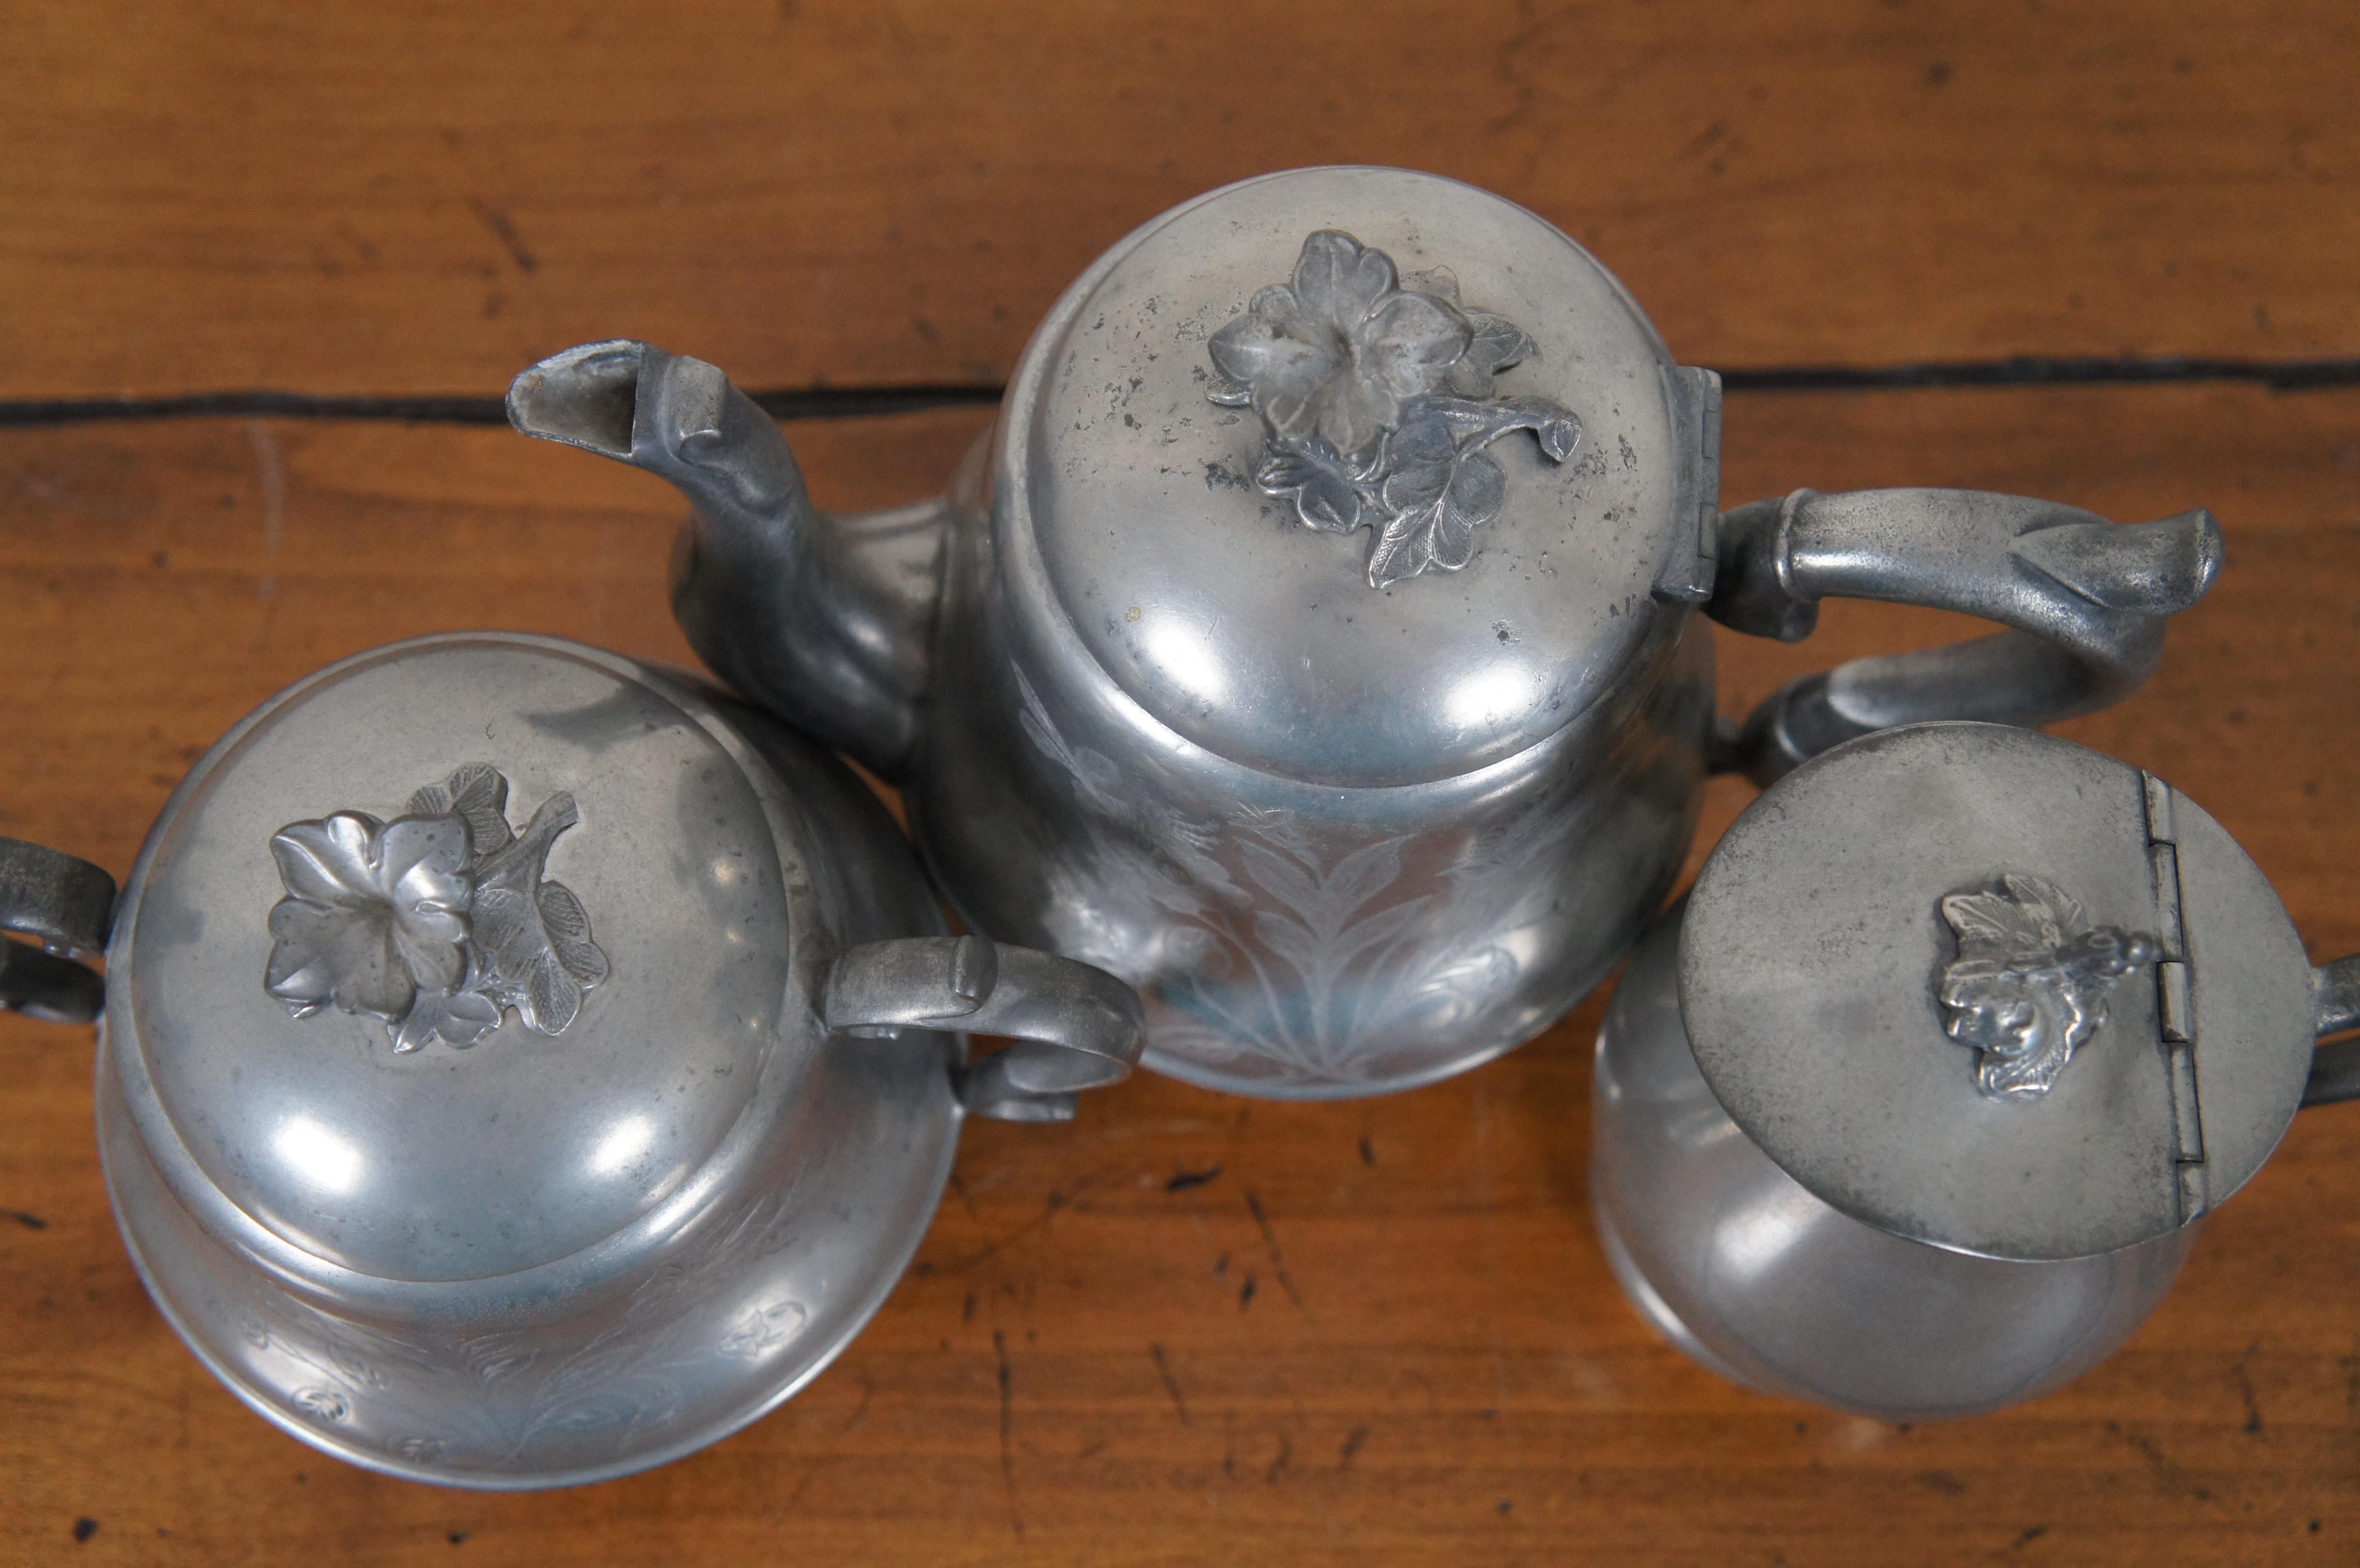 3 Antique H. Homan & Co Pewter Tea Coffee Teapot Sugar Bowl Creamer In Good Condition For Sale In Dayton, OH